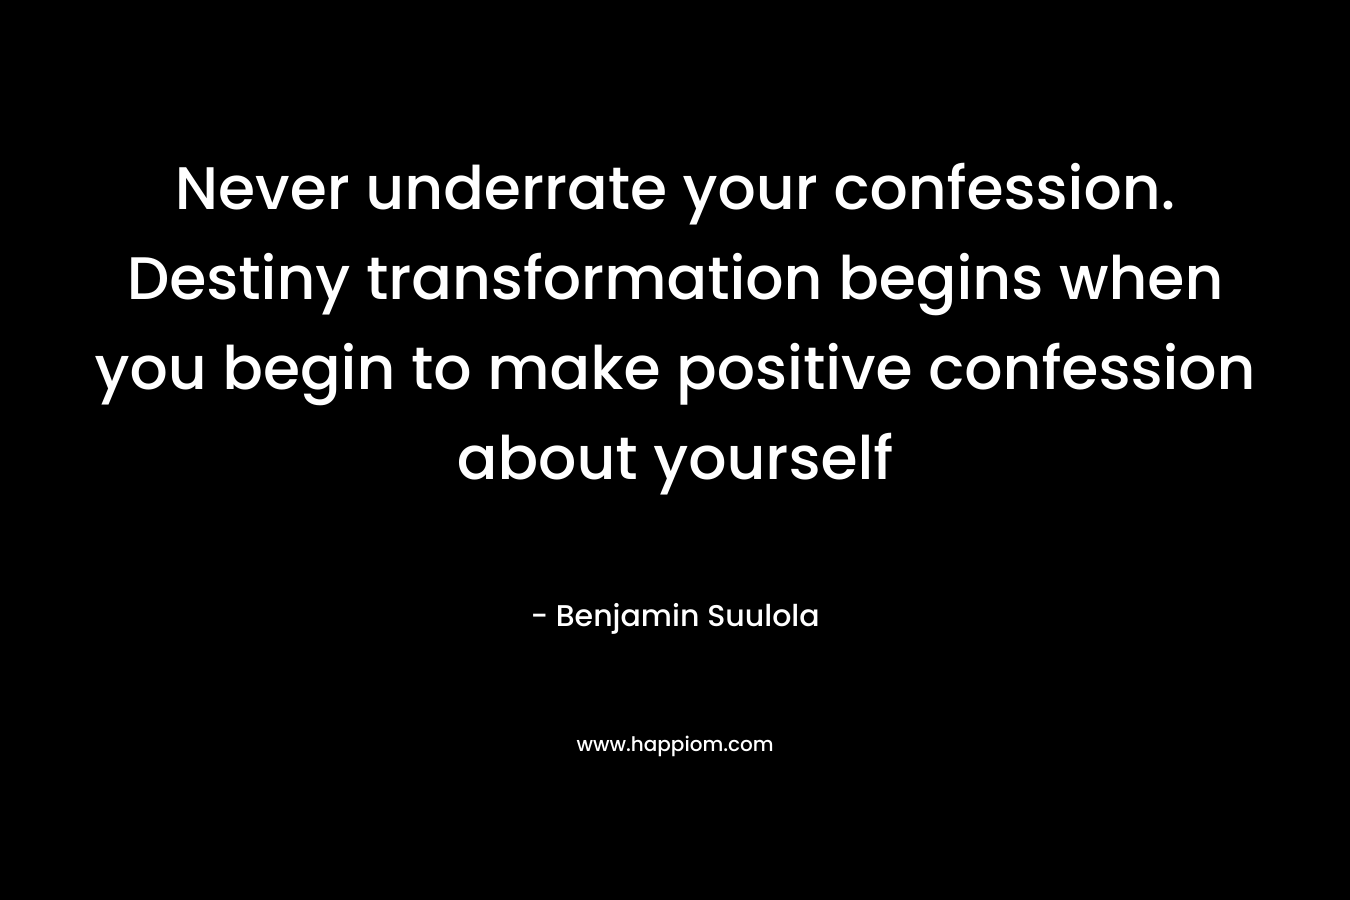 Never underrate your confession. Destiny transformation begins when you begin to make positive confession about yourself – Benjamin Suulola